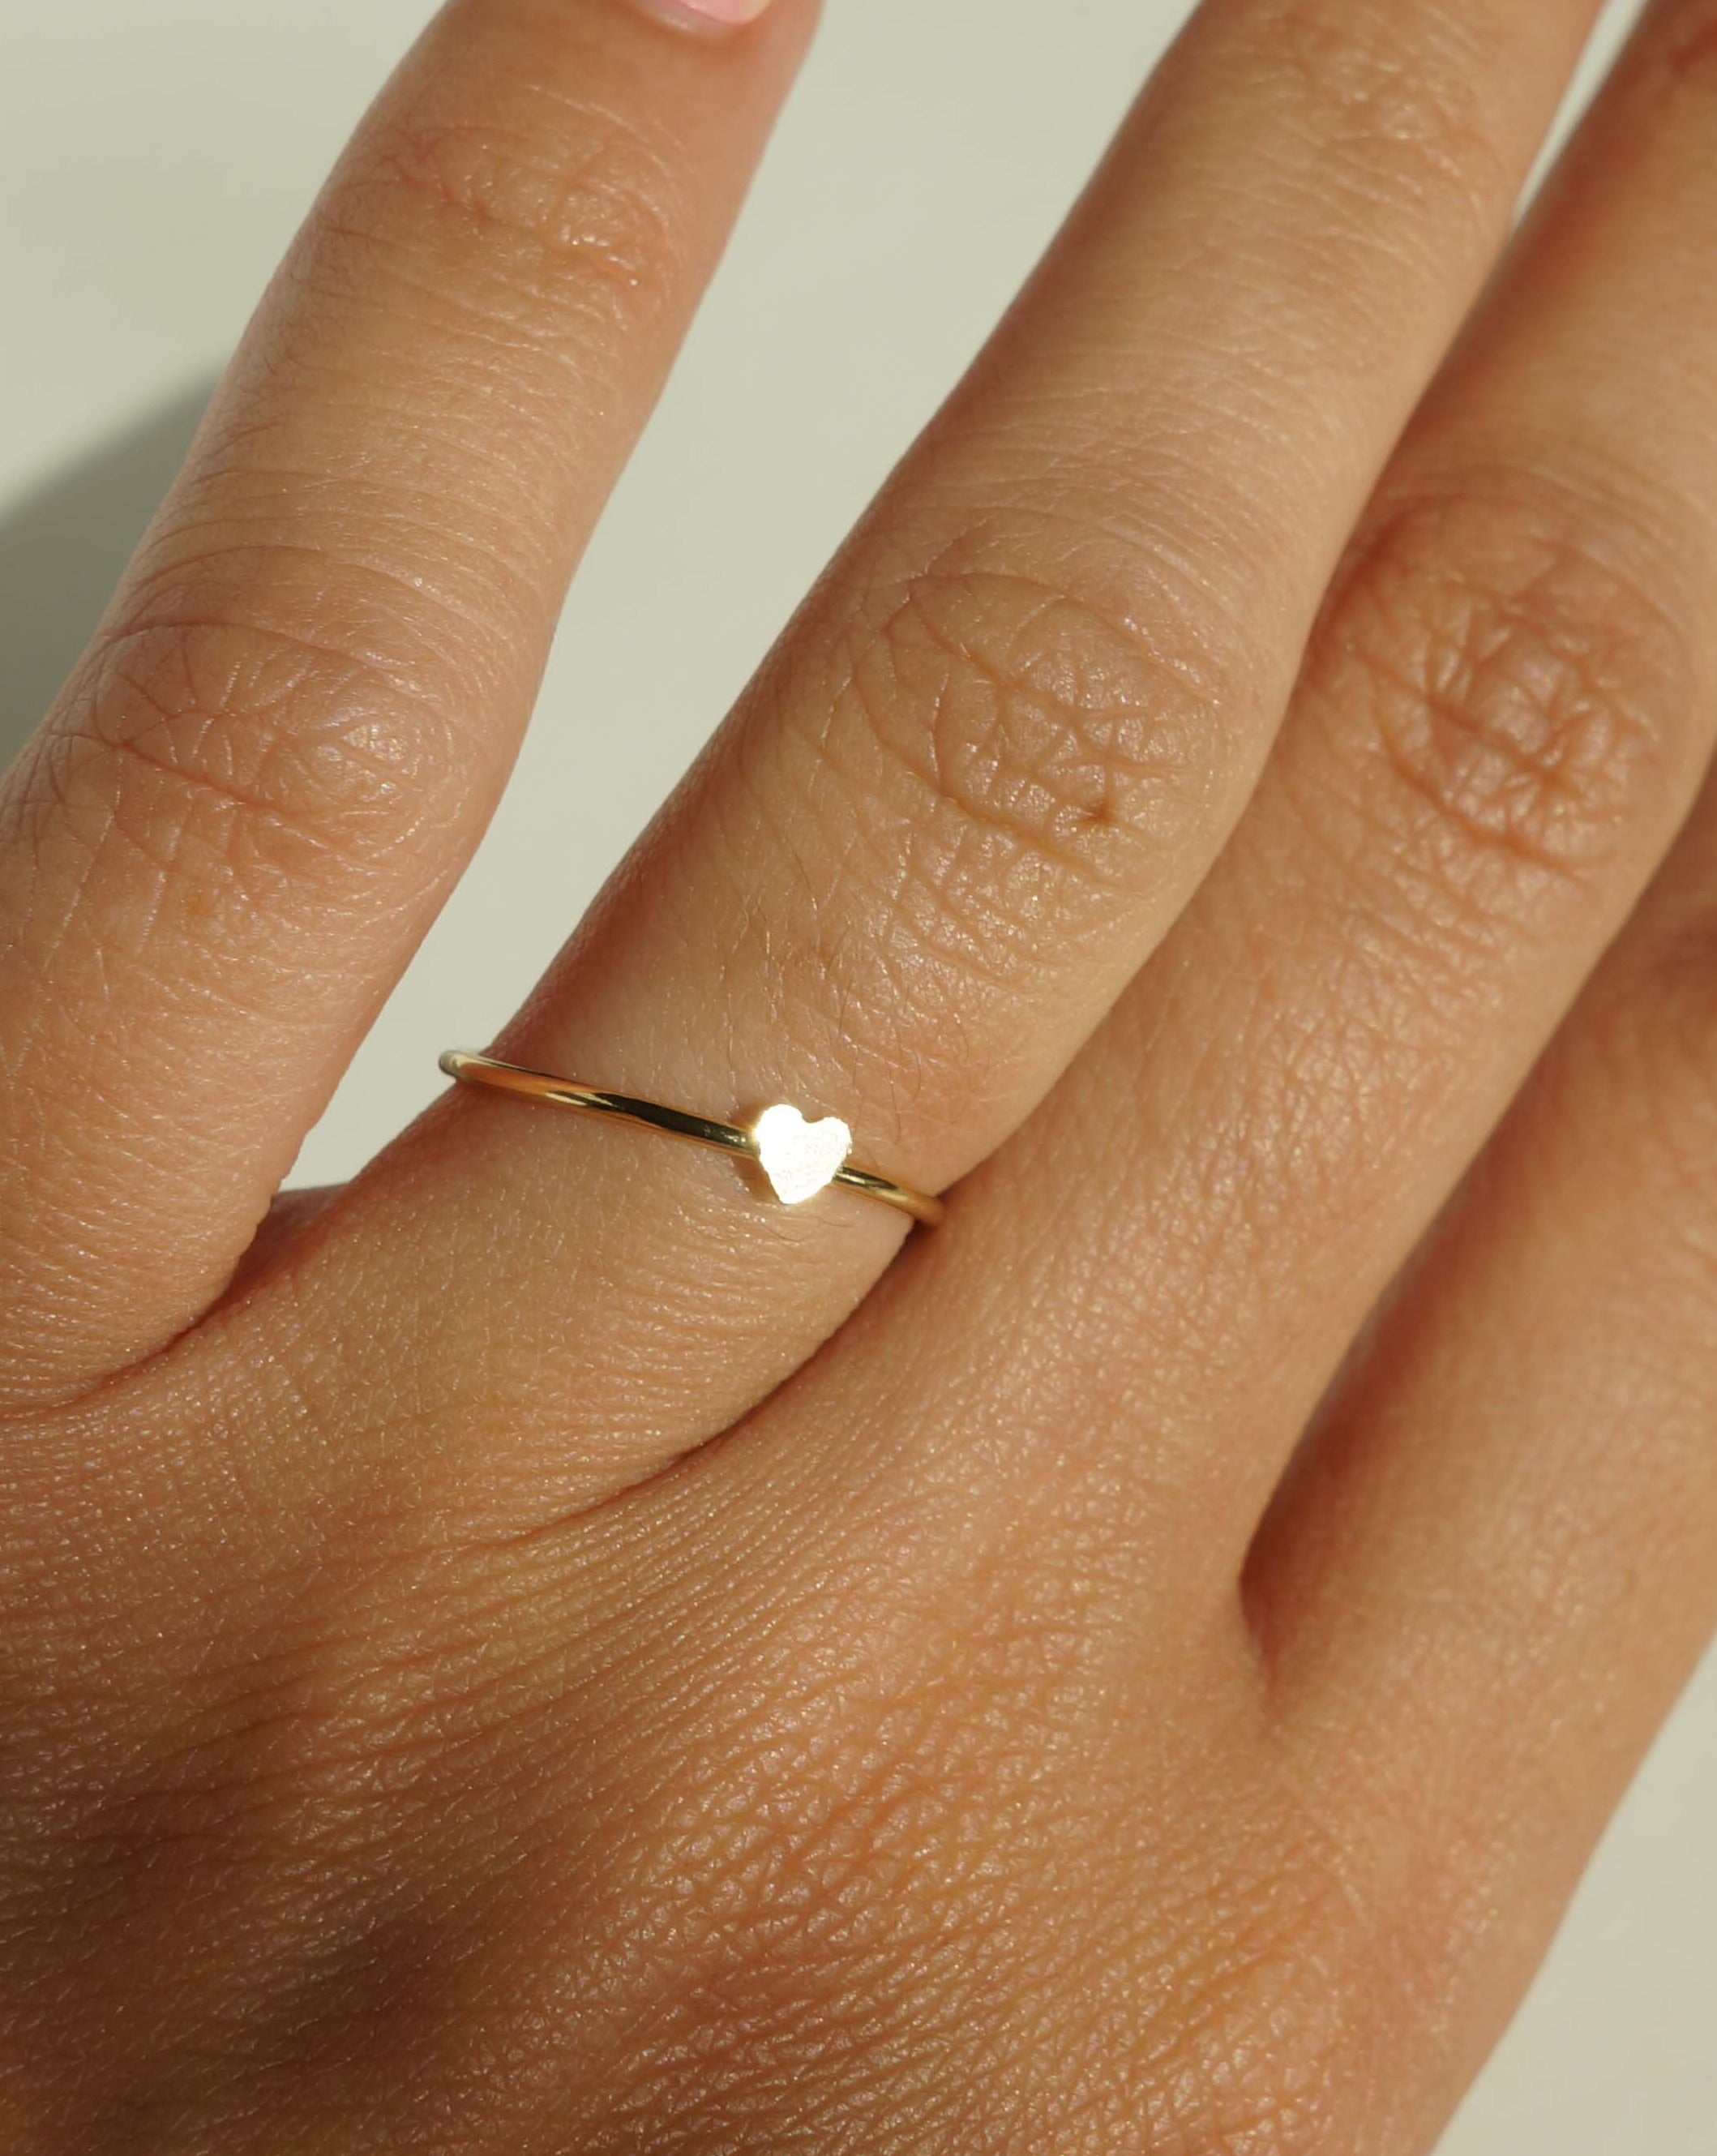 Heart Ring by KOZAKH. A 1mm band, crafted in 14K Gold Filled, featuring a gold heart design.